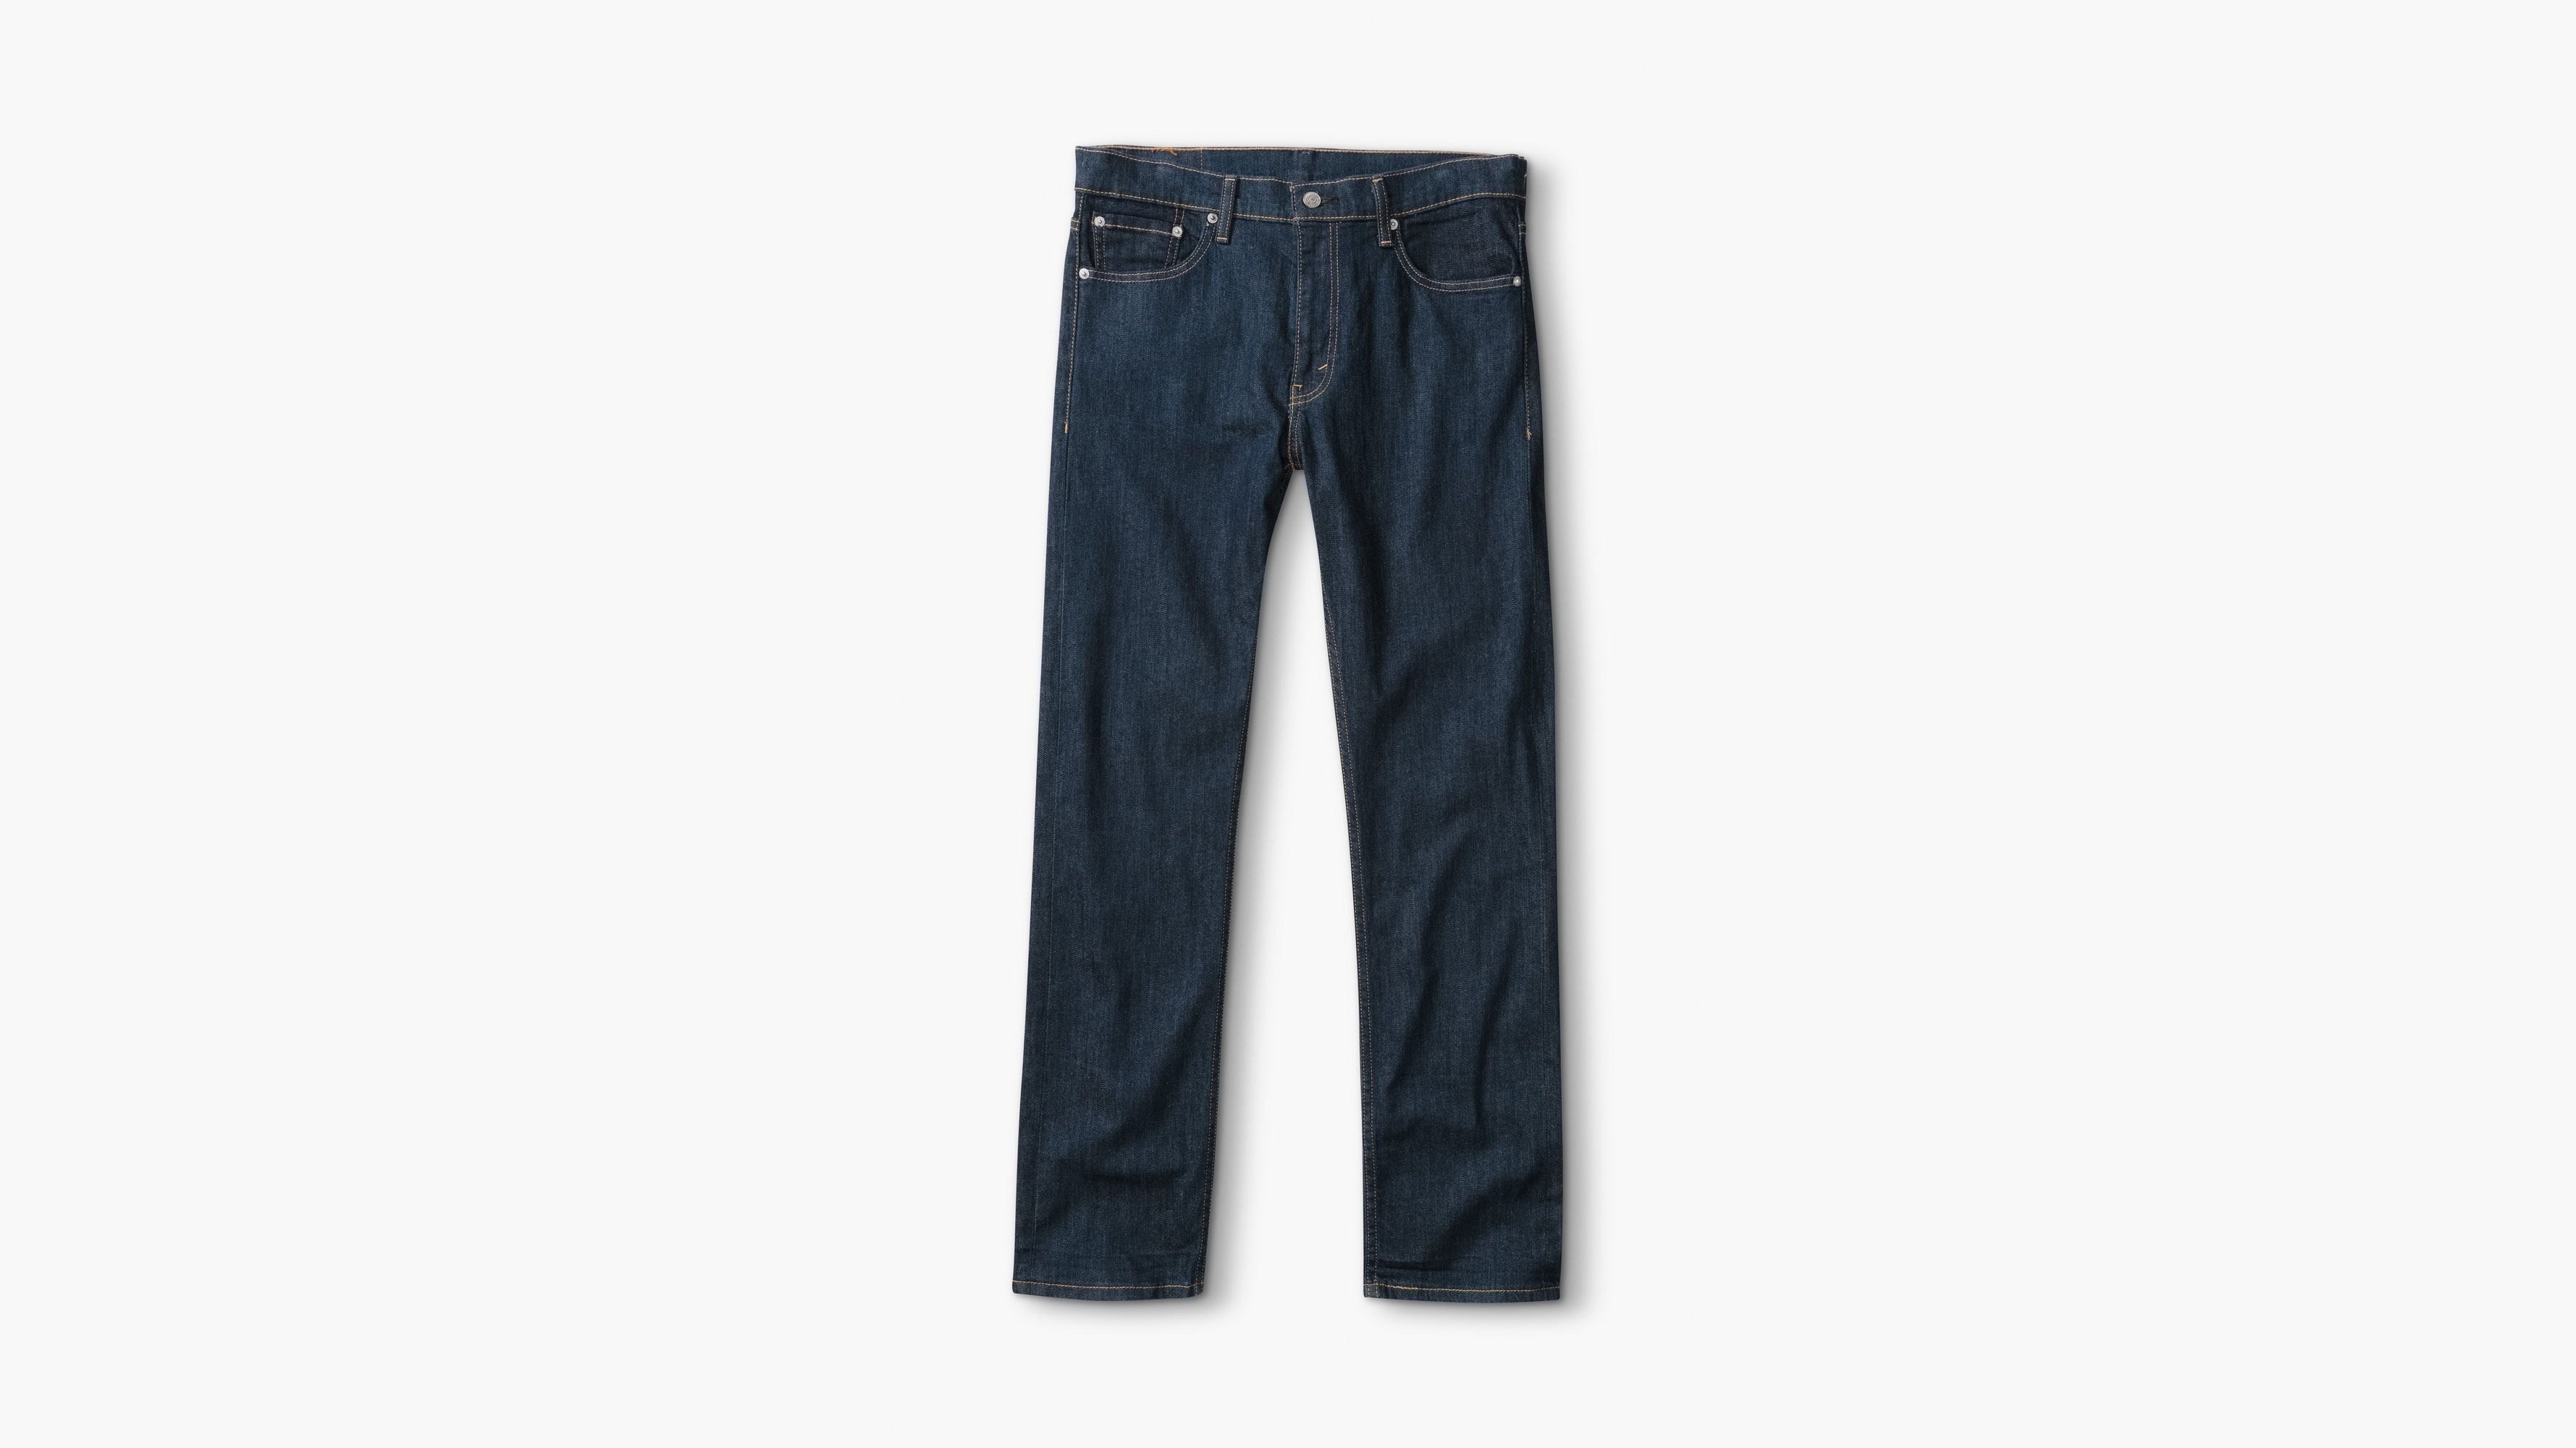 Goldie Blues™ Mid Rise Legacy Straight Jean